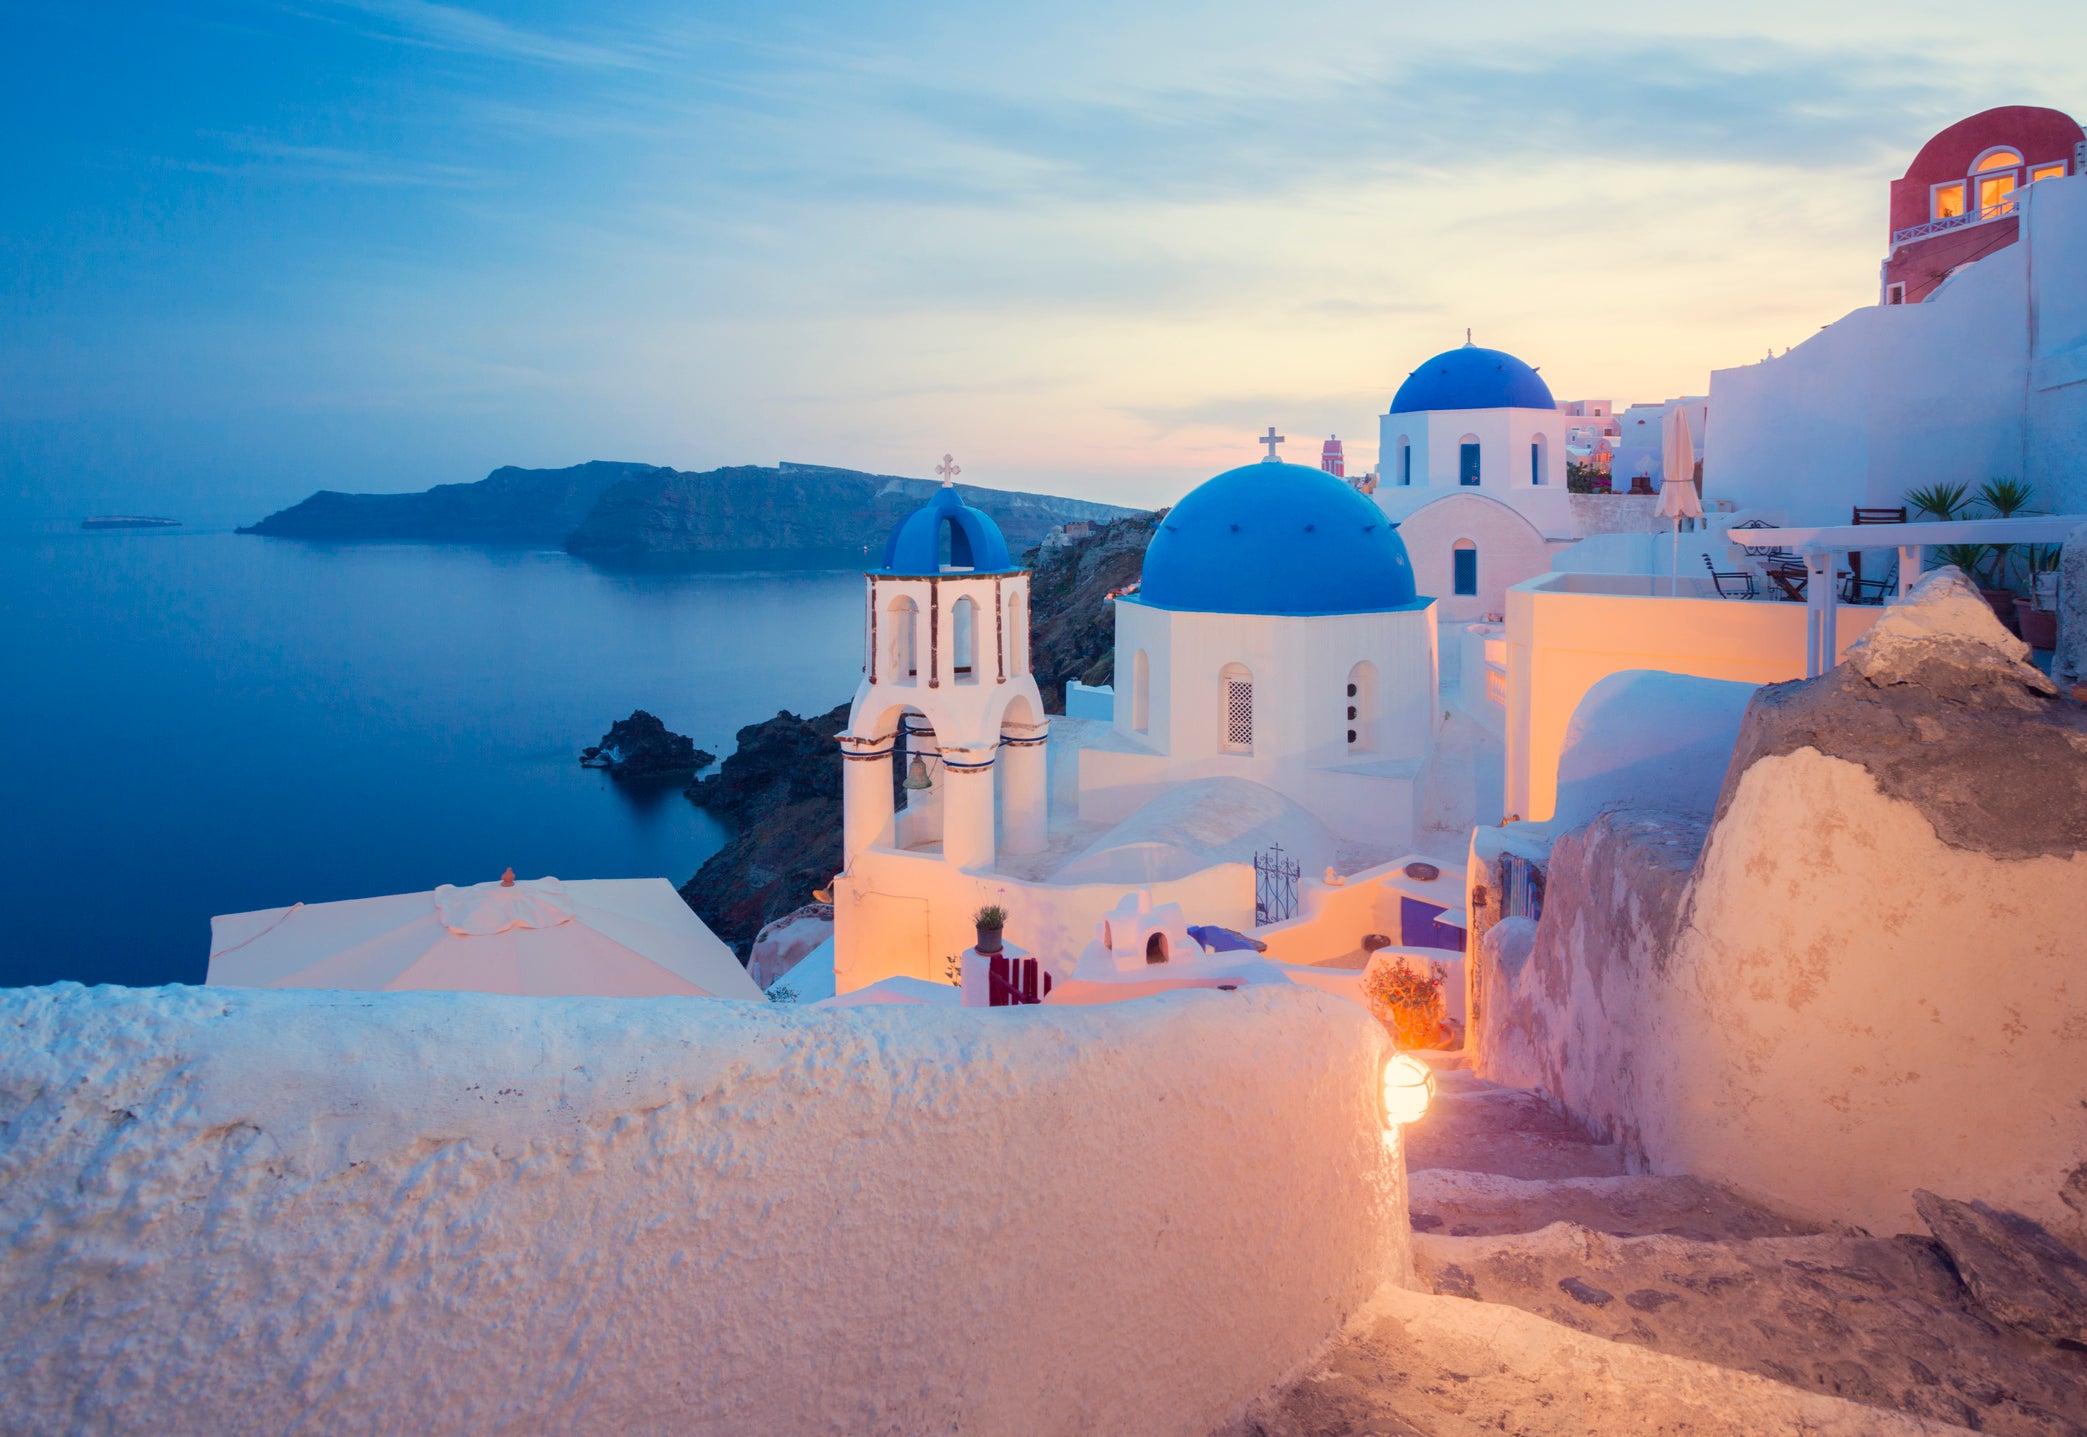 Could Santorini, but not Greece, make the green list?